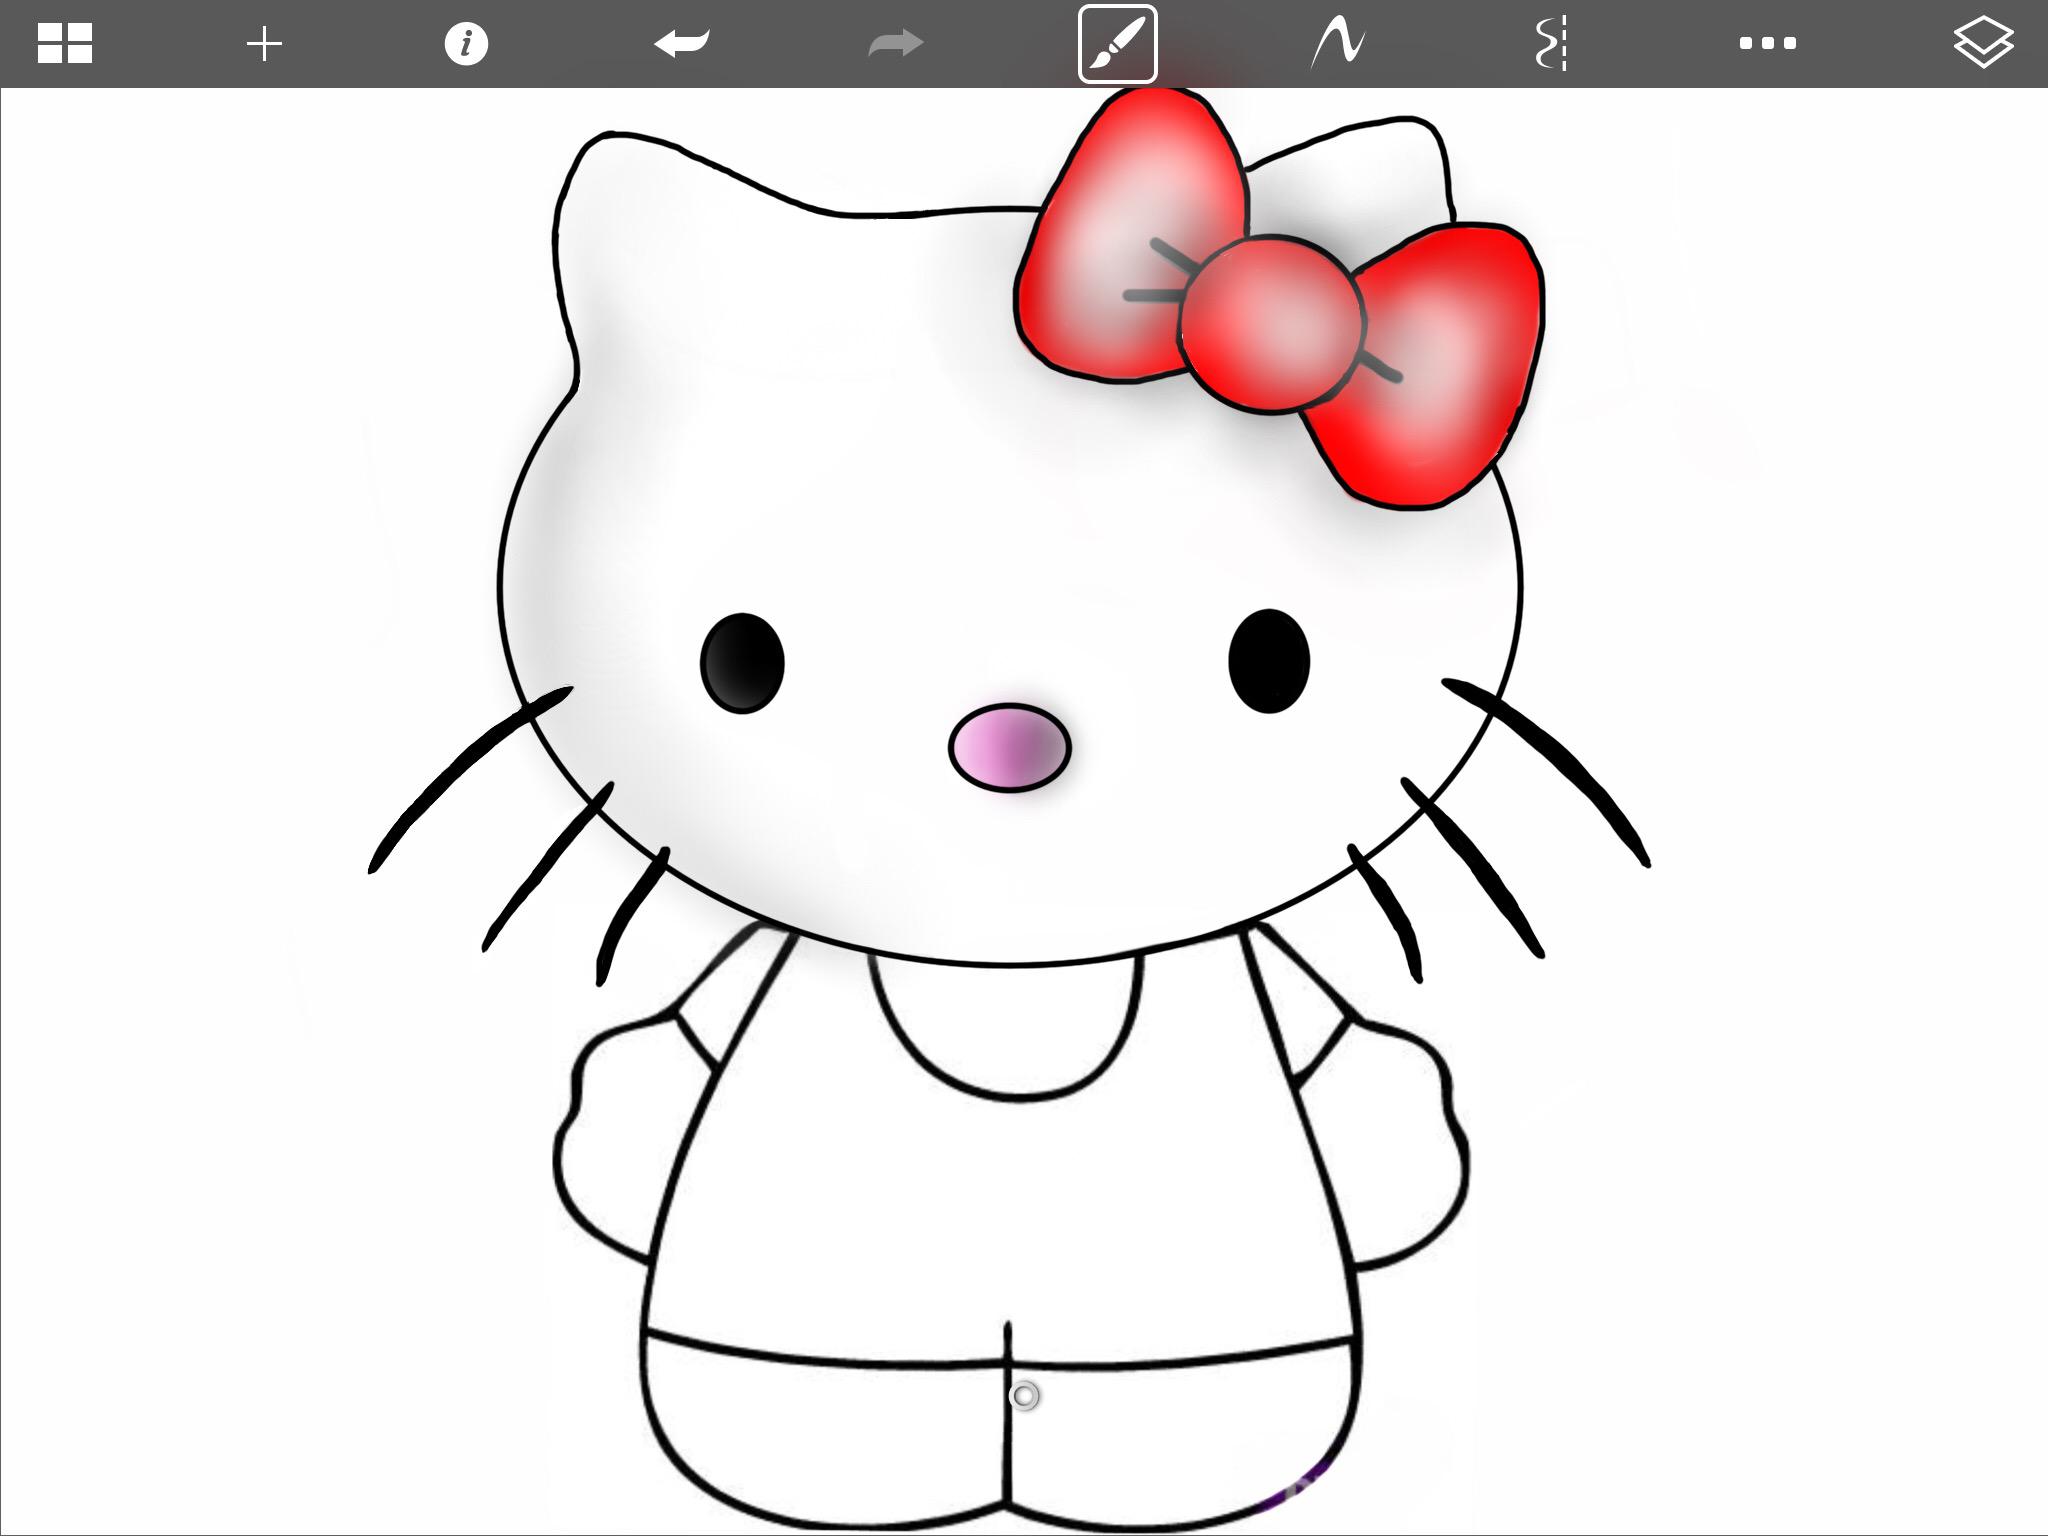 Here's a drawing I made of Hello Kitty. What do you think? : r/drawings